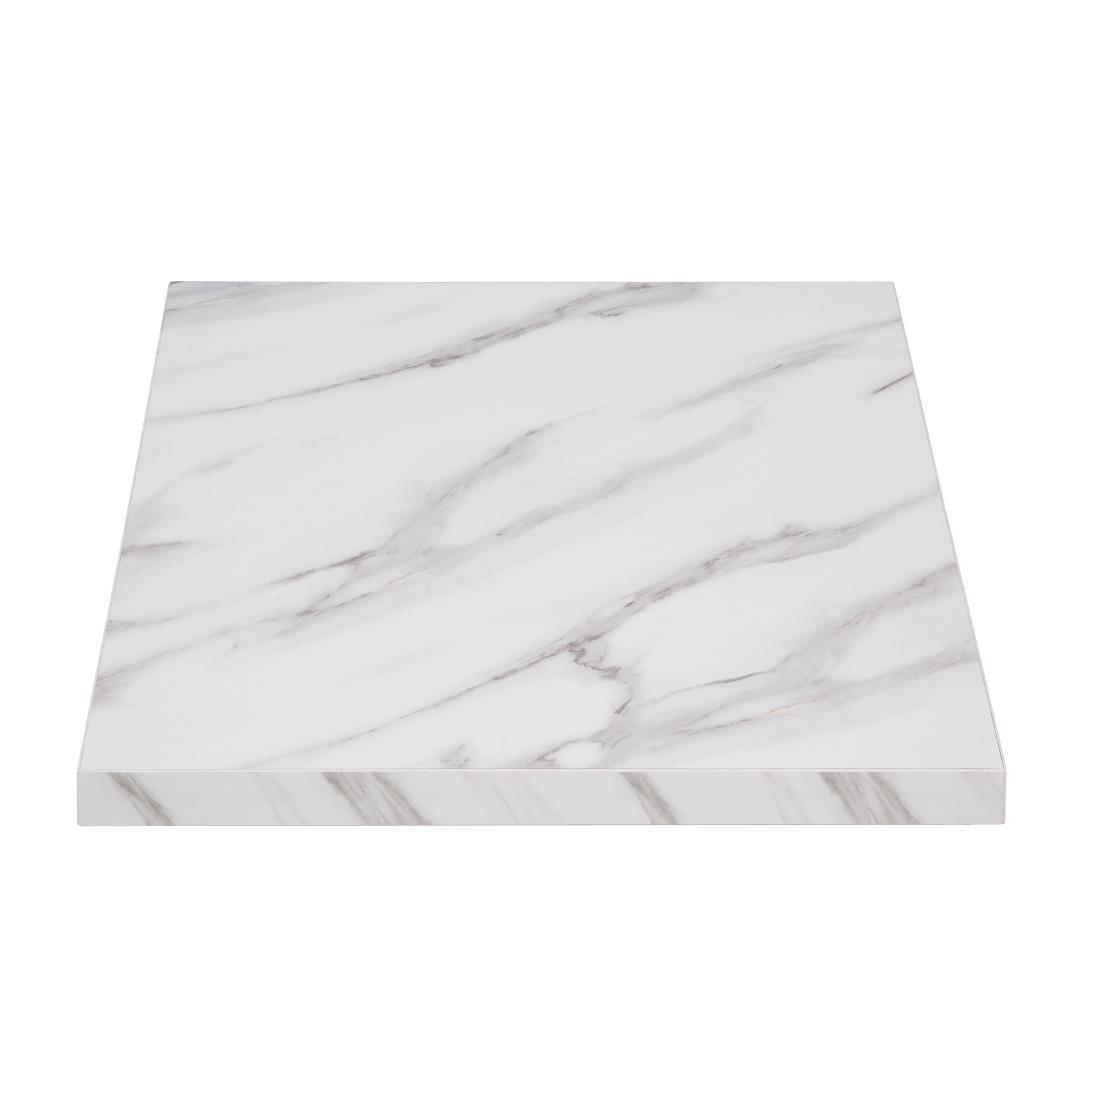 Bolero Pre-Drilled Square Table Top Marble Effect 600mm - DT444  - 1